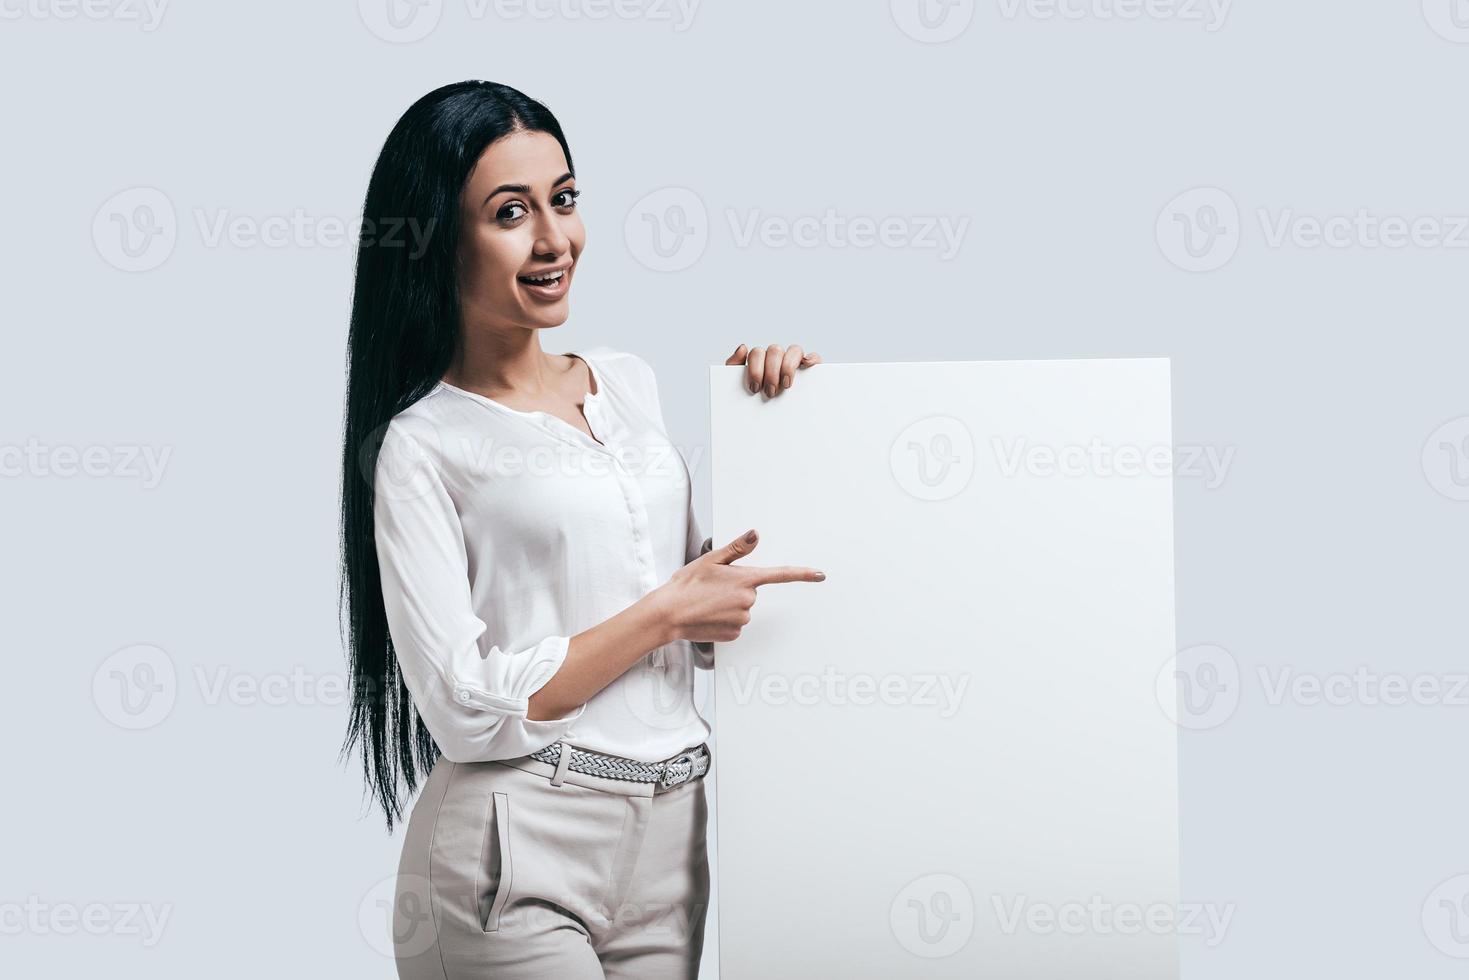 Place new ideas here Young confident woman in white shirt pointing on blank flipchart while standing against grey background photo